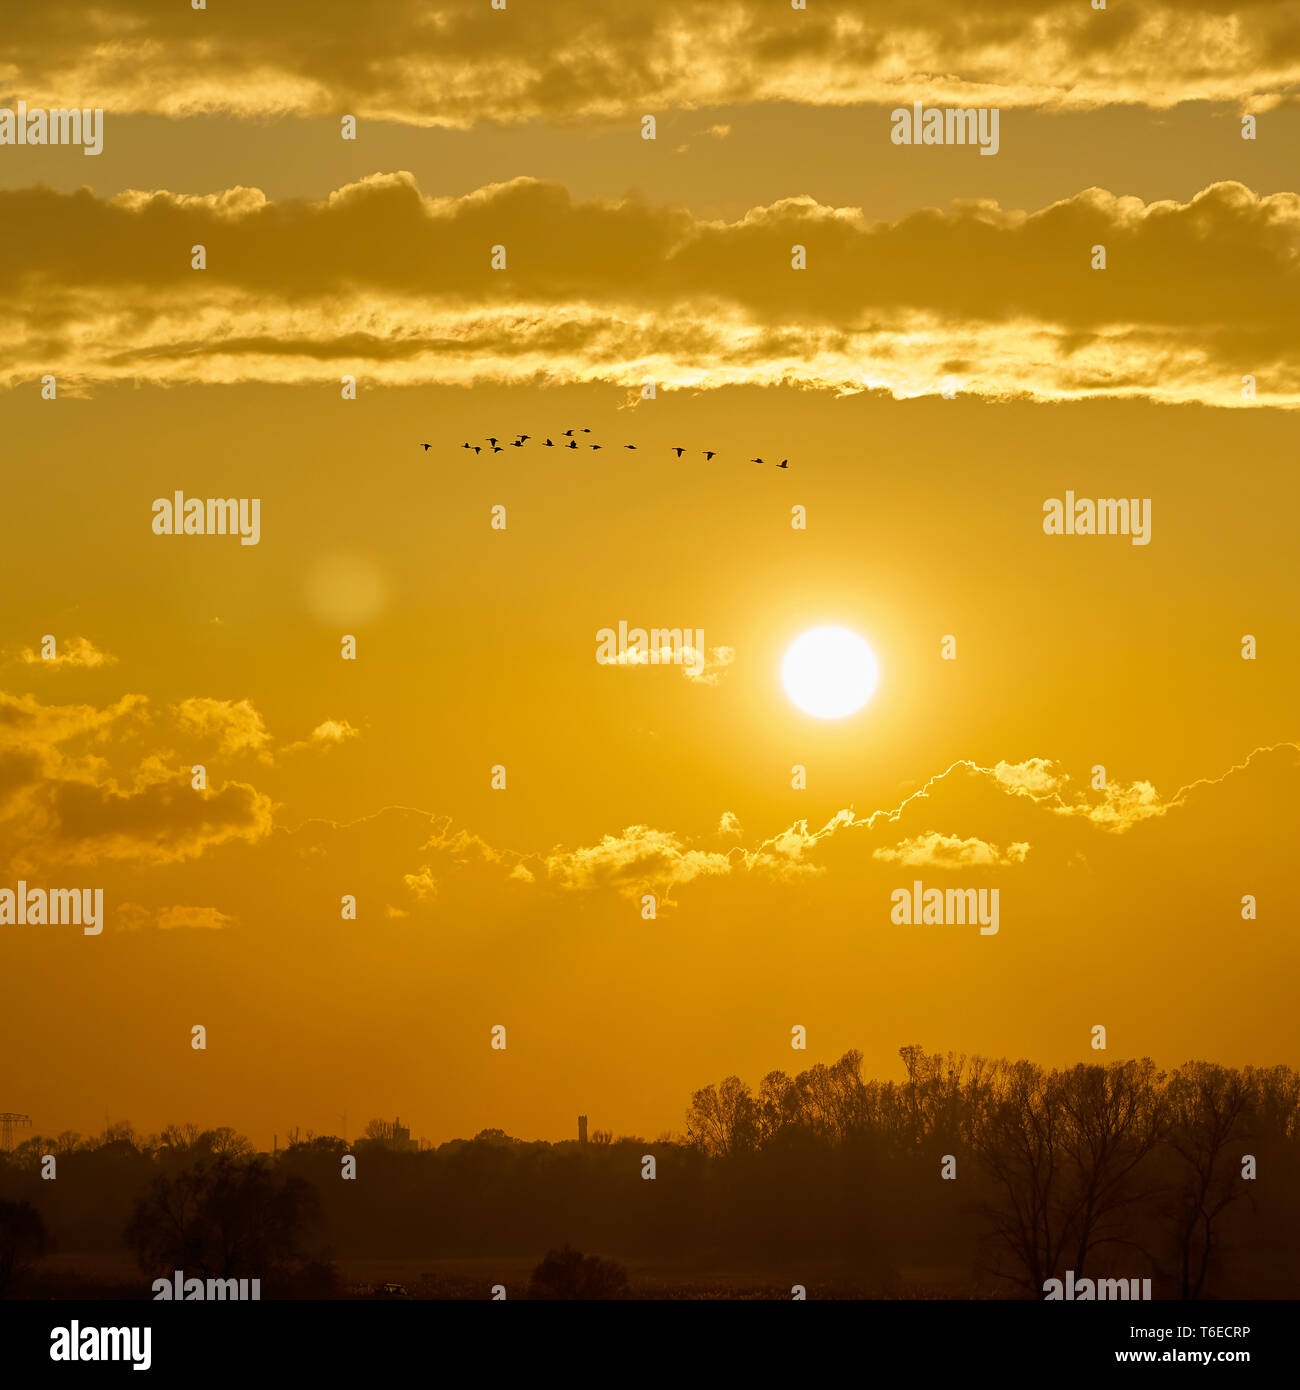 Sunset with clouds and a flock of geese Stock Photo